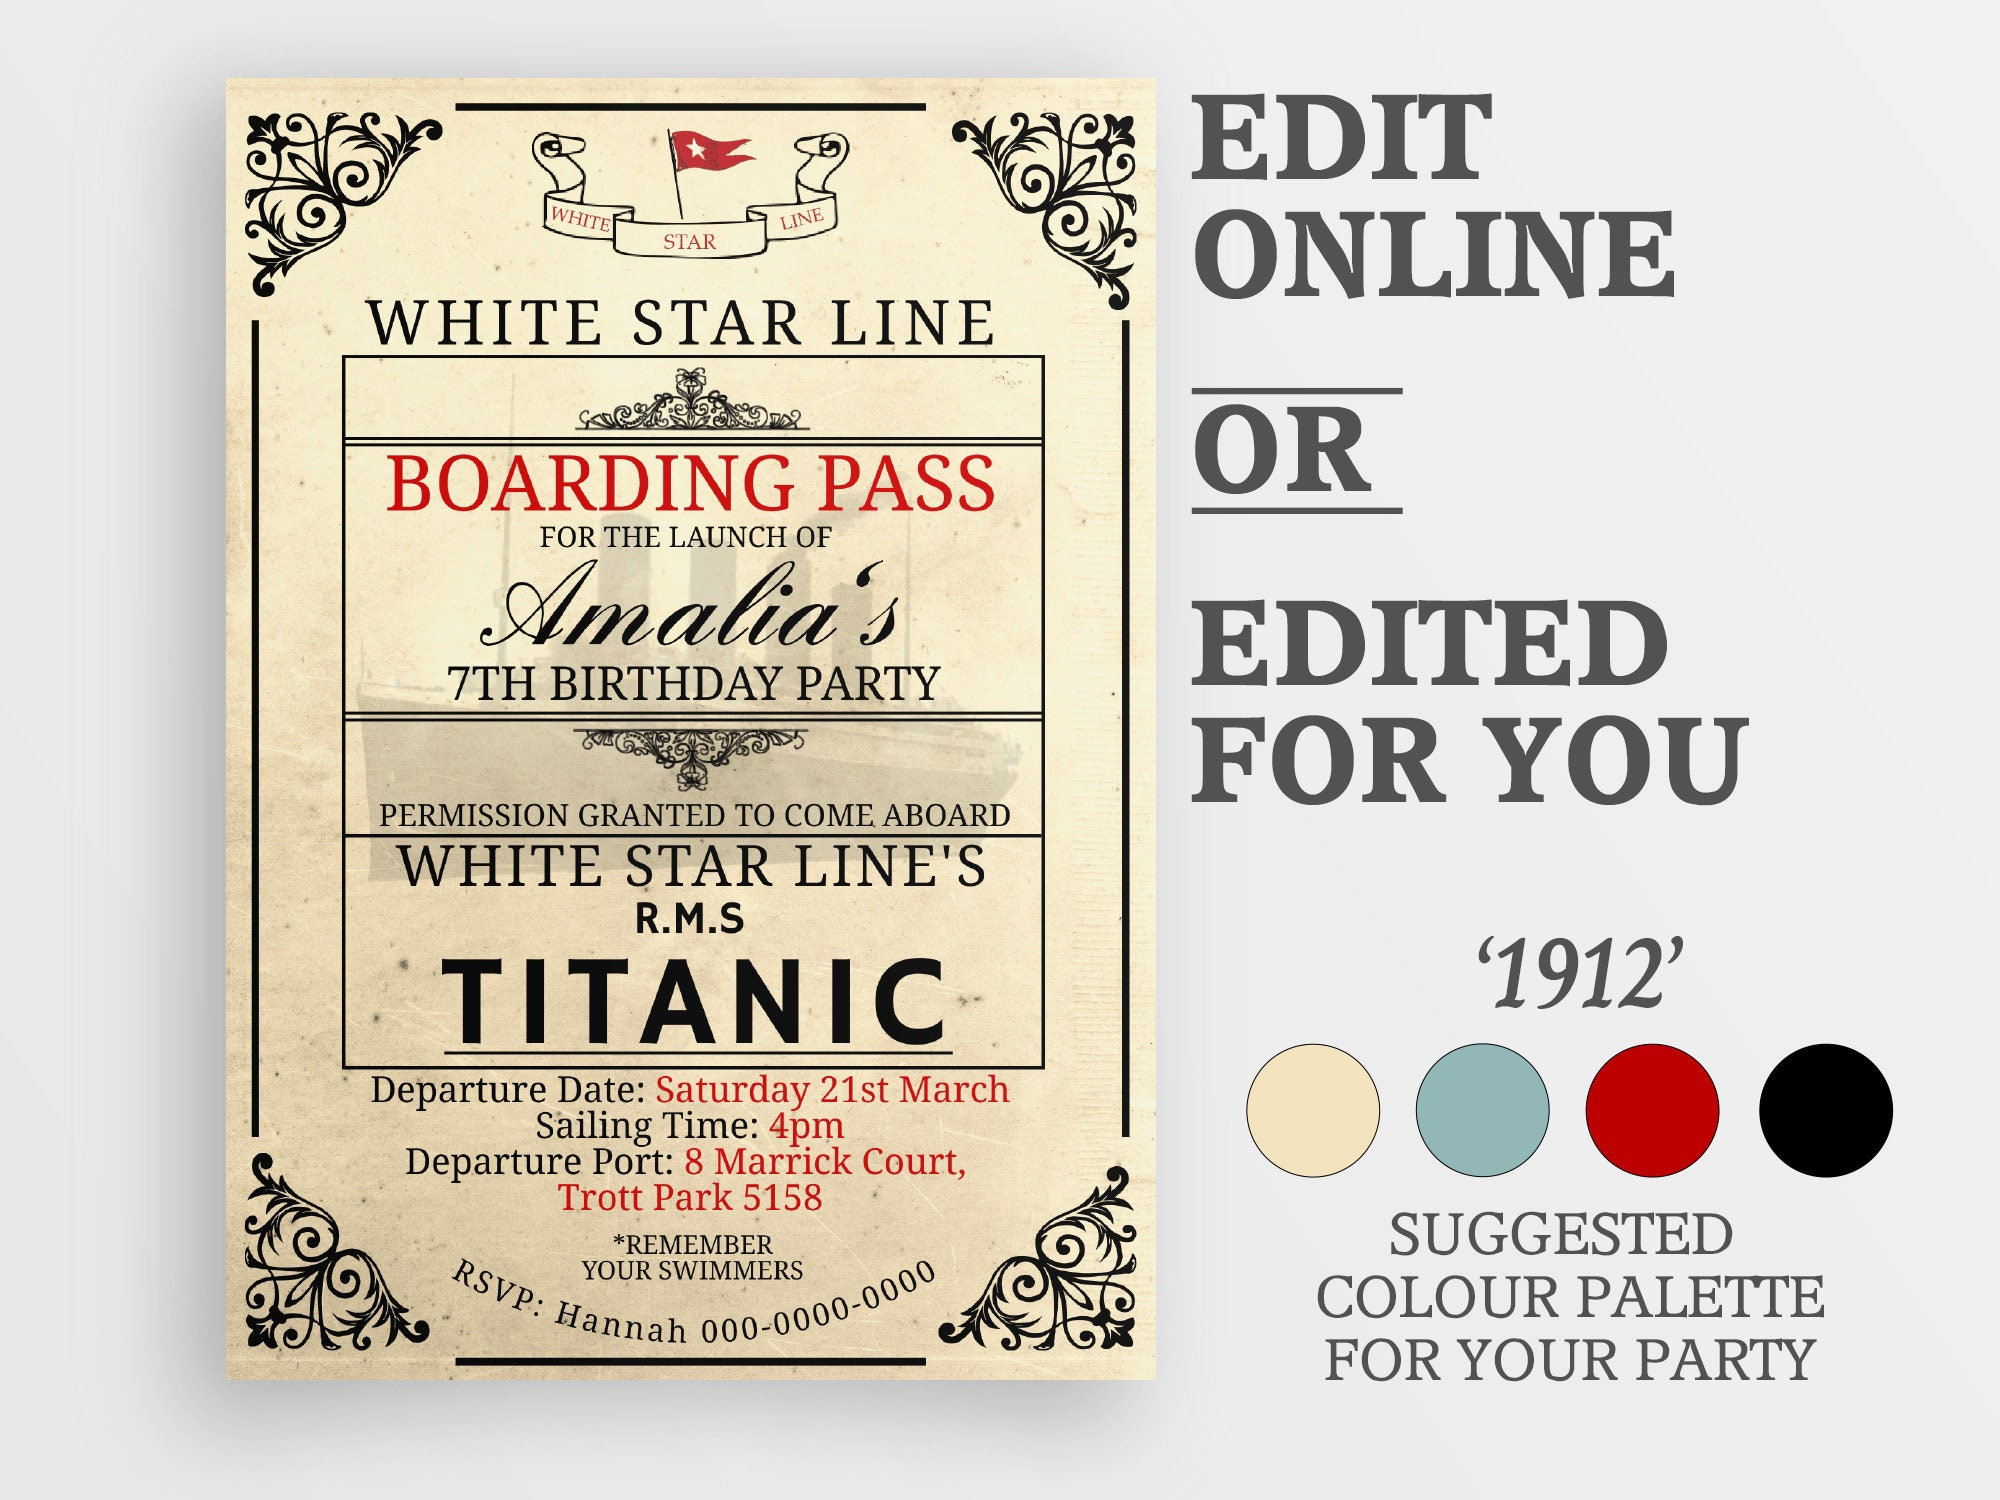 Titanic Launch Ticket, Boarding Pass, Postcard, and Envelope - White Star  Line